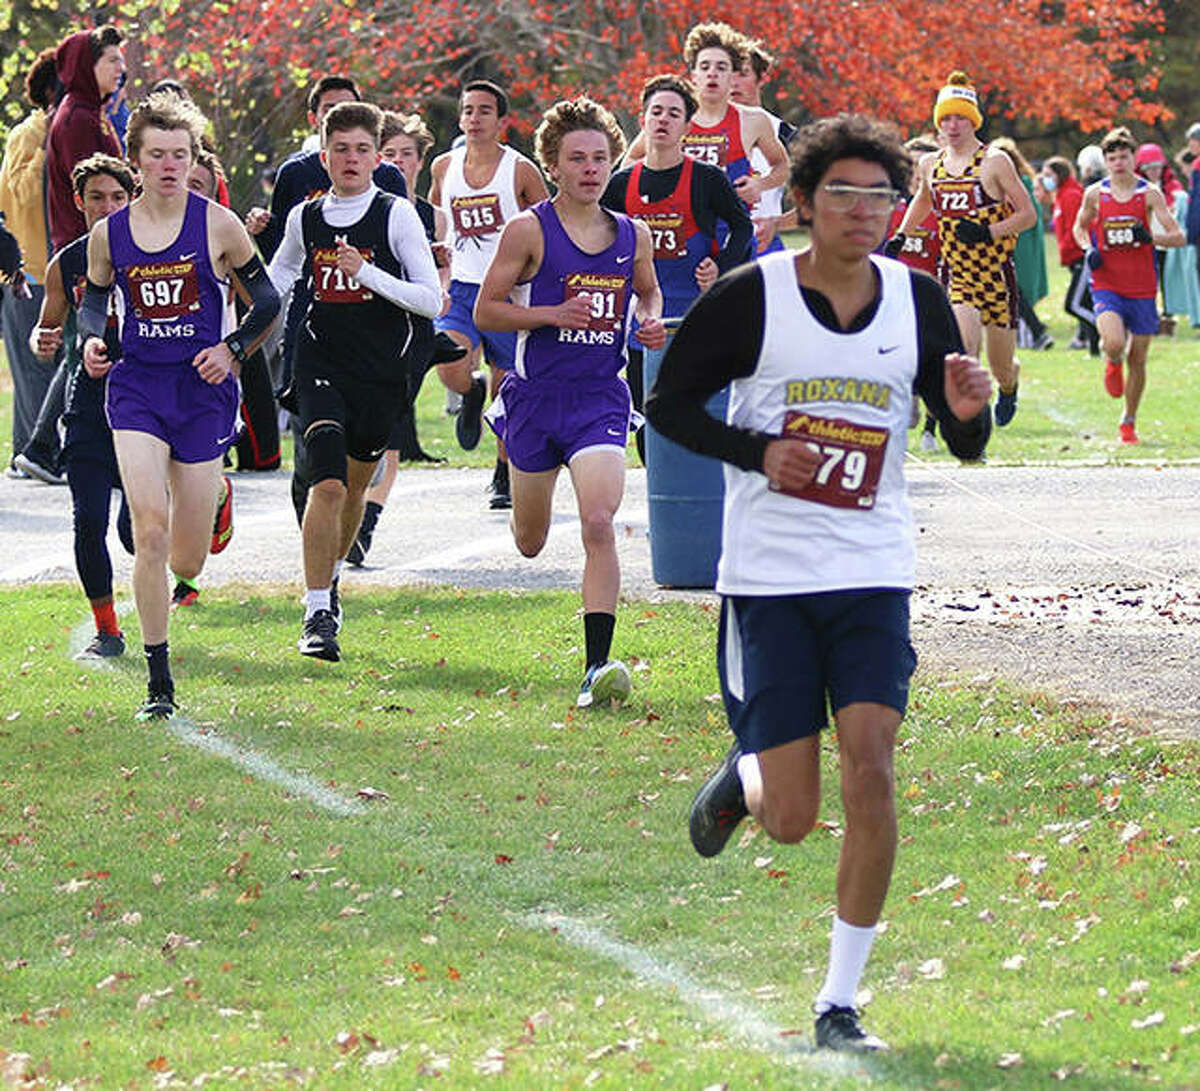 Roxana senior Carlos Ruvalcaba leads a pack of runners during the Carlinville Class 1A Regional at Loveless Park in Carlinville. Ruvalcaba and Shells sophomore Riley Doyle were honored as Roxana’s runners of the year by the Alton Road Runners Club.